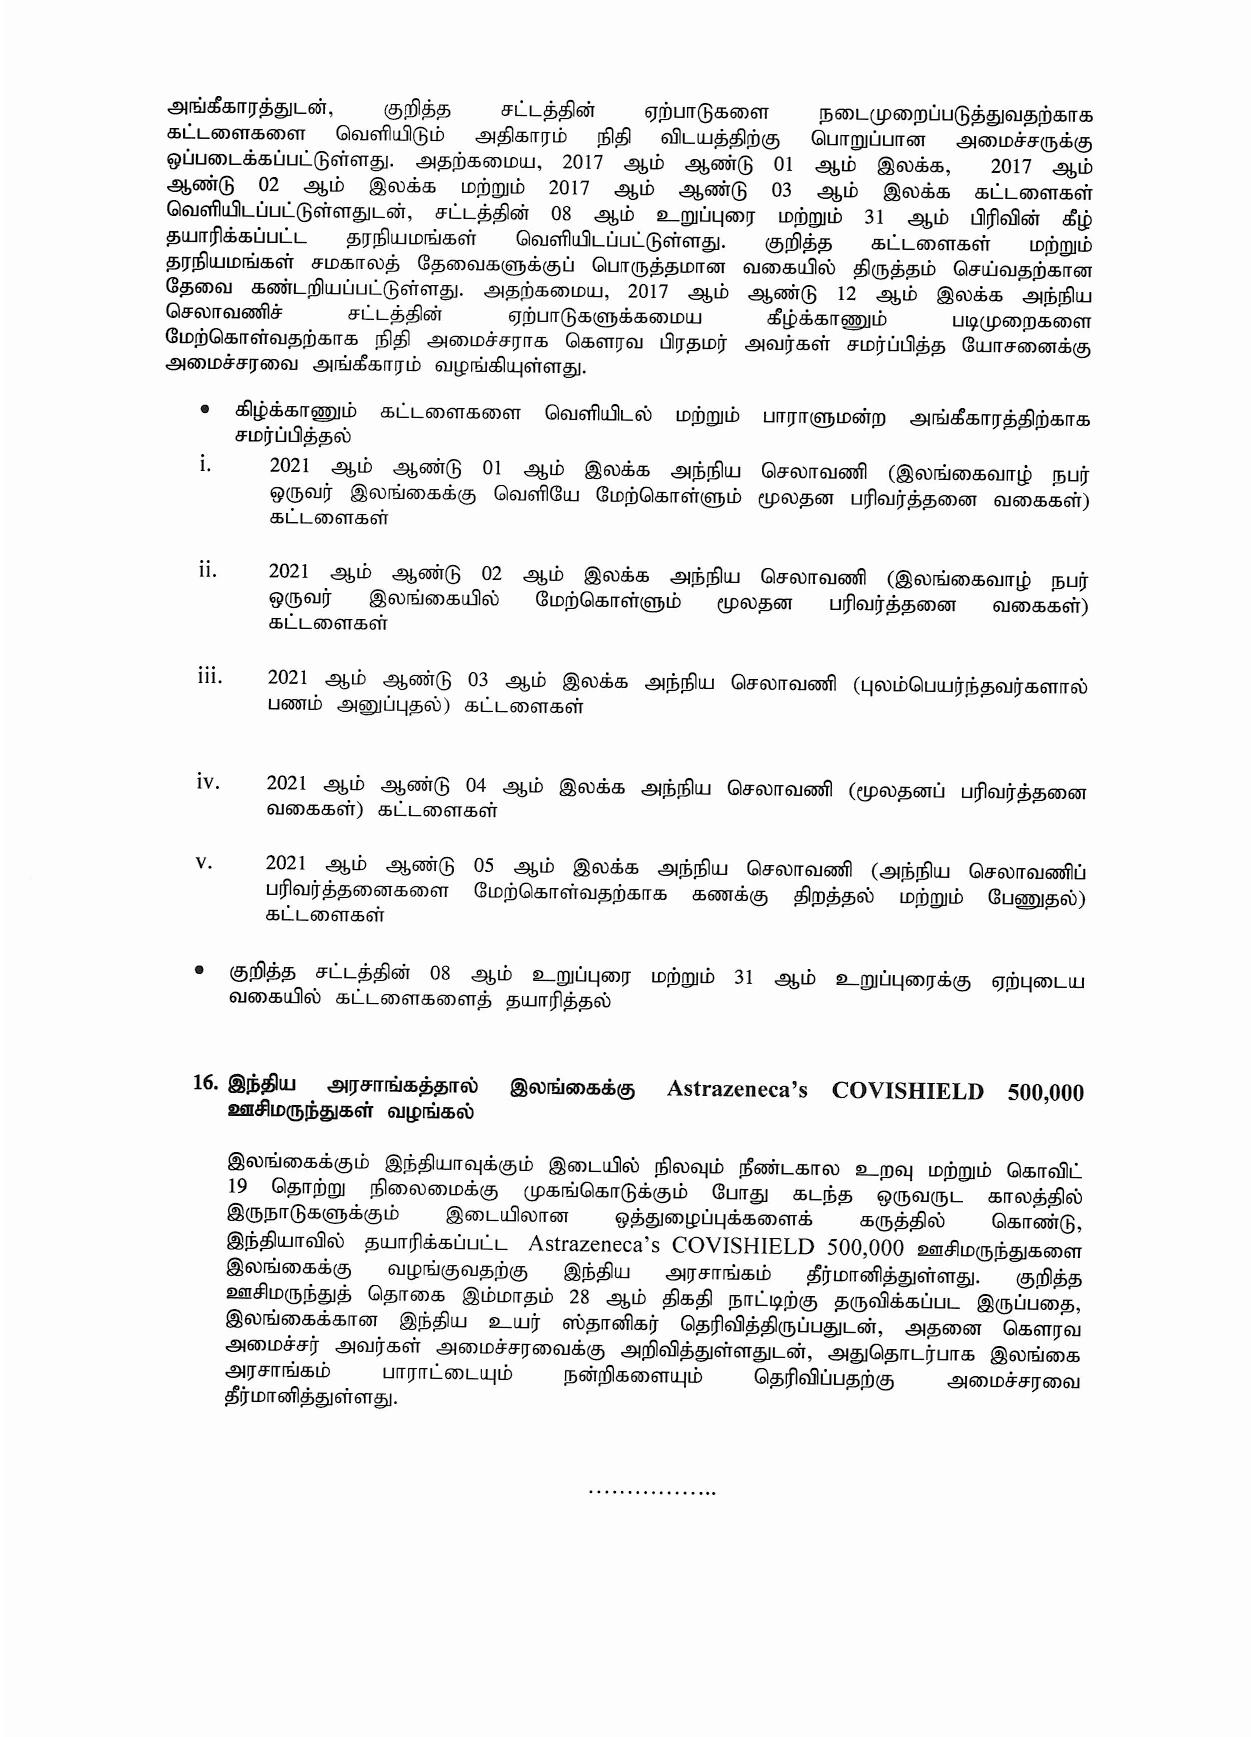 Cabinet Decision on 25.01.2021 Tamil page 006